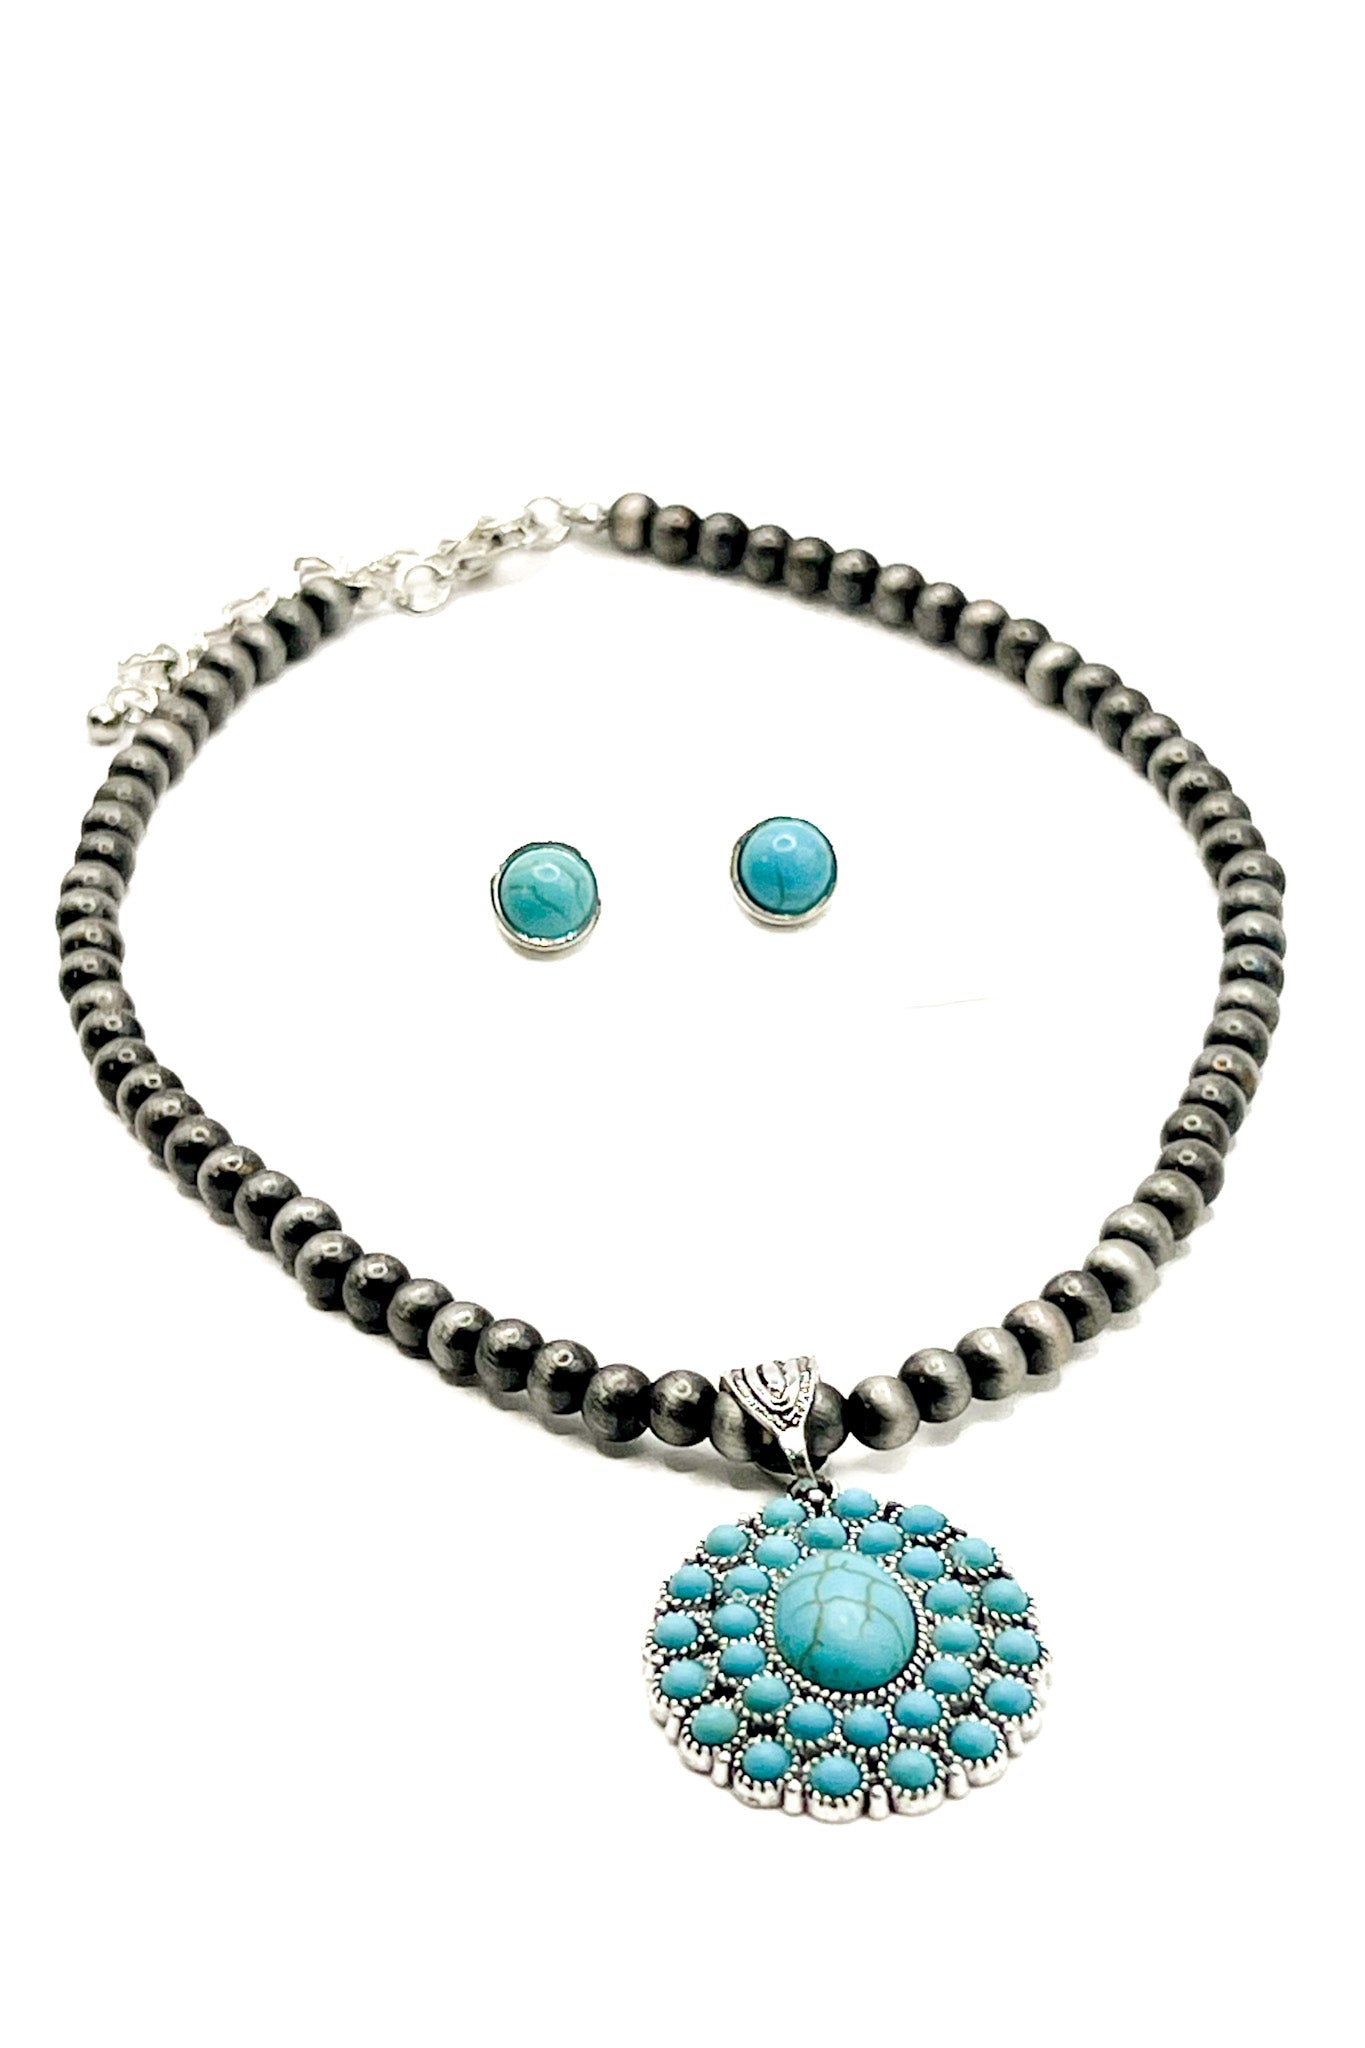 Antiqued Silver & Turquoise Stone Necklace Set